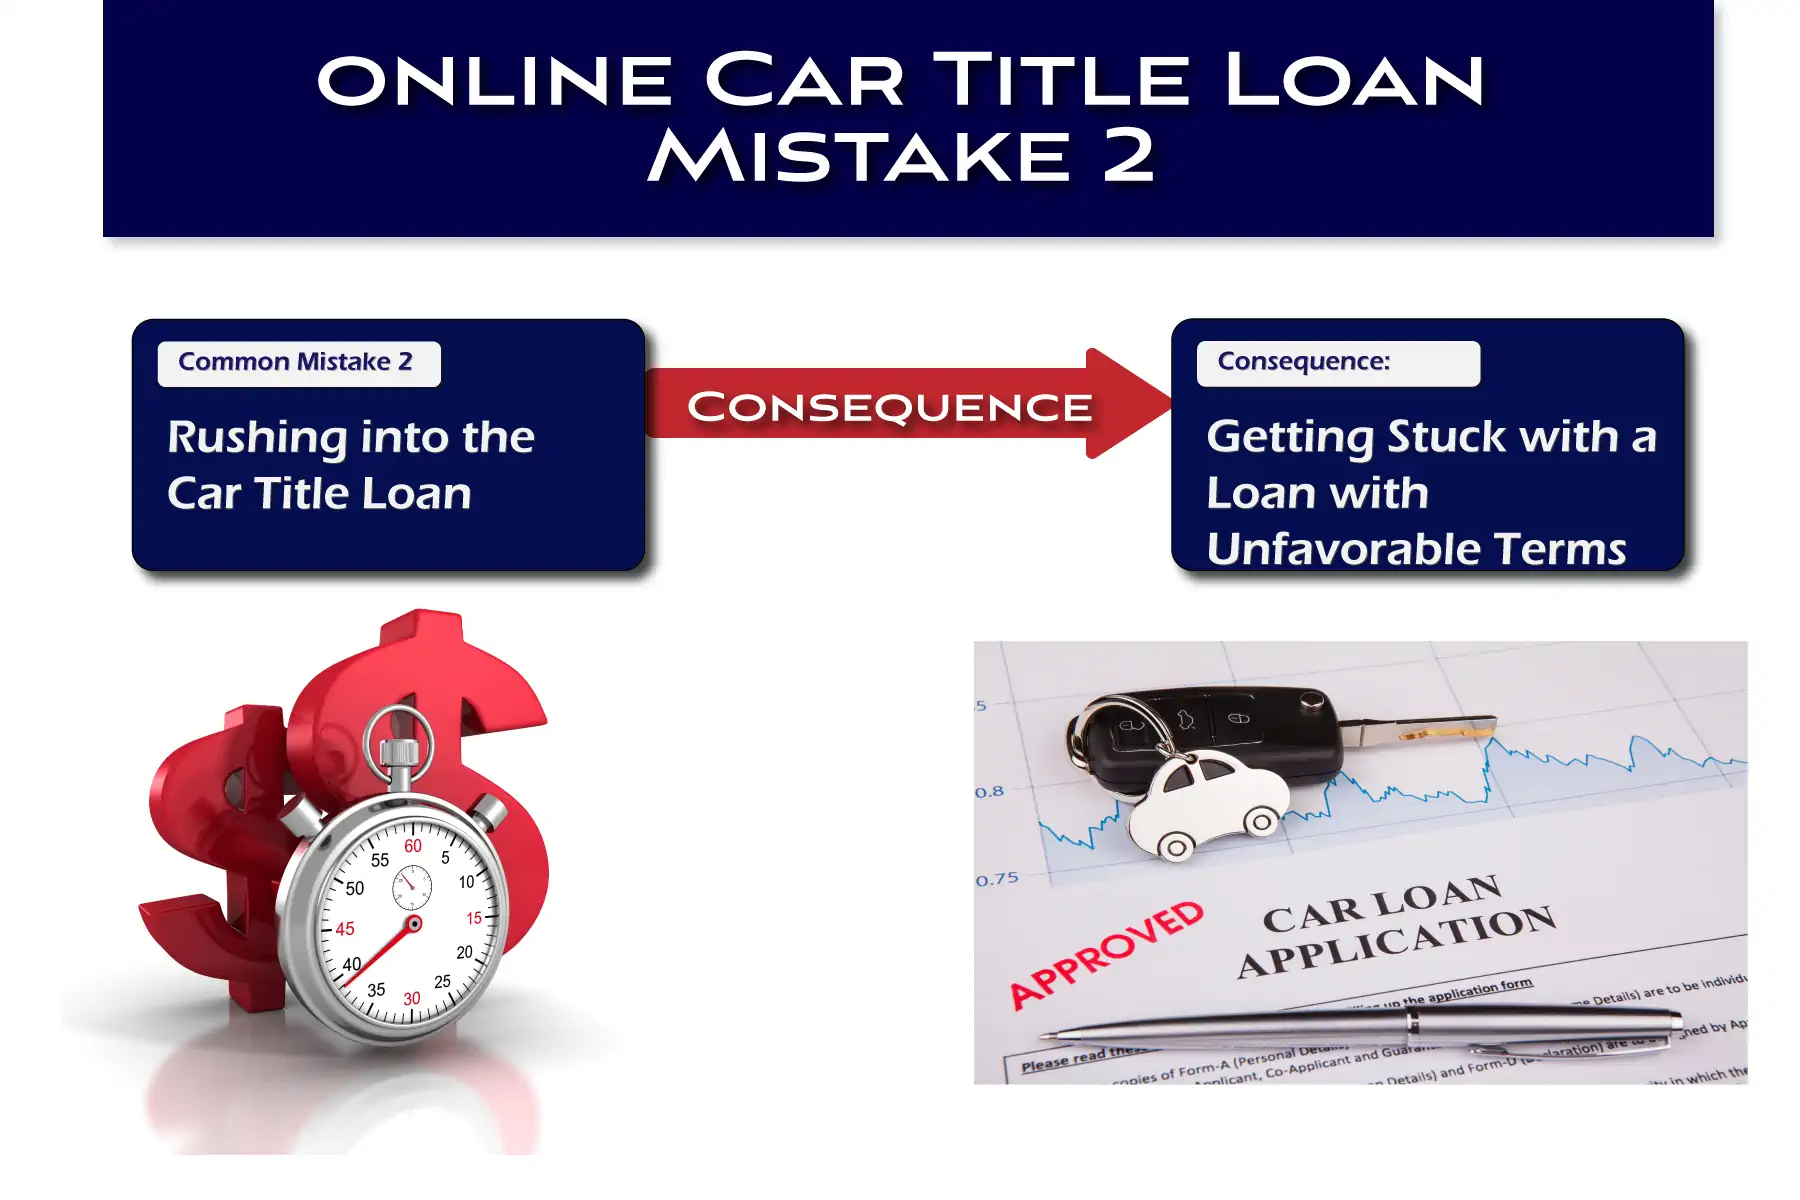 Common Title Loan Mistake 2 - rushing into the loan